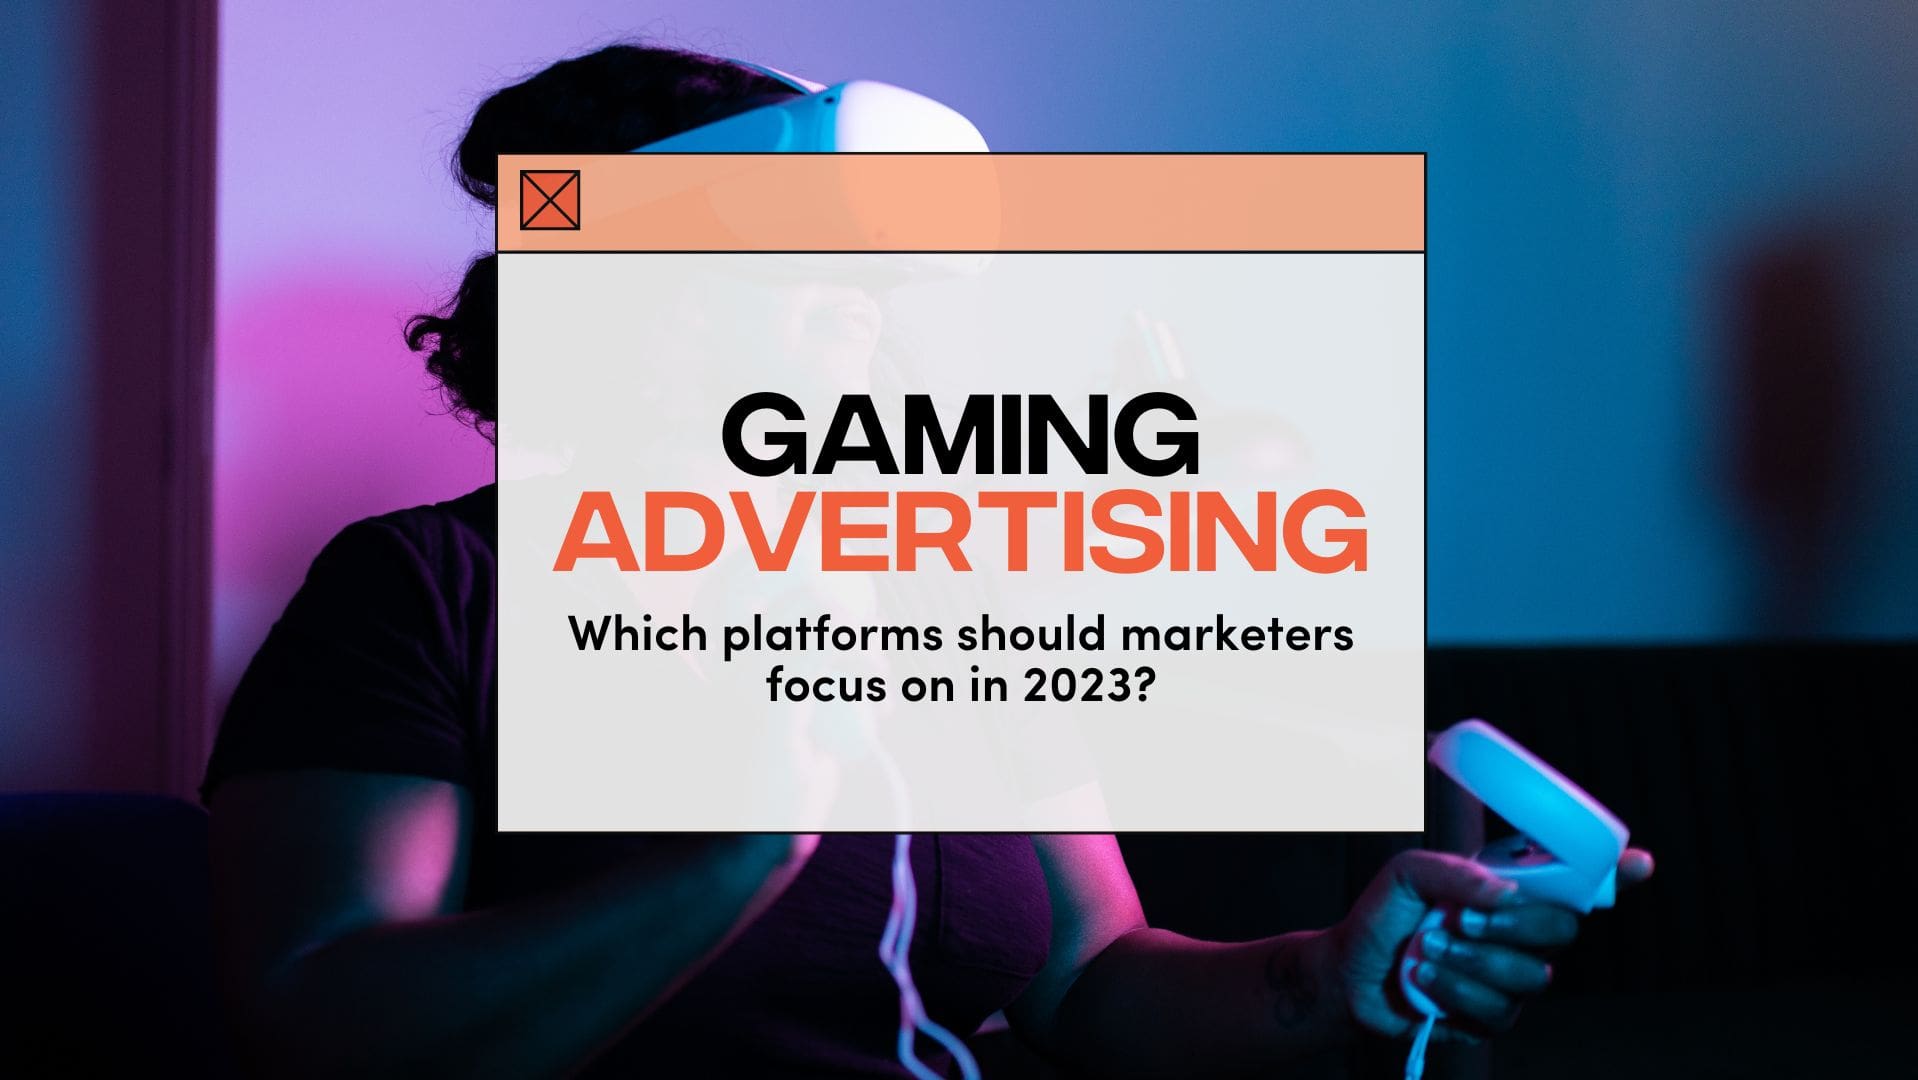 Gaming Advertising - which platforms should marketers focus on in 2023?